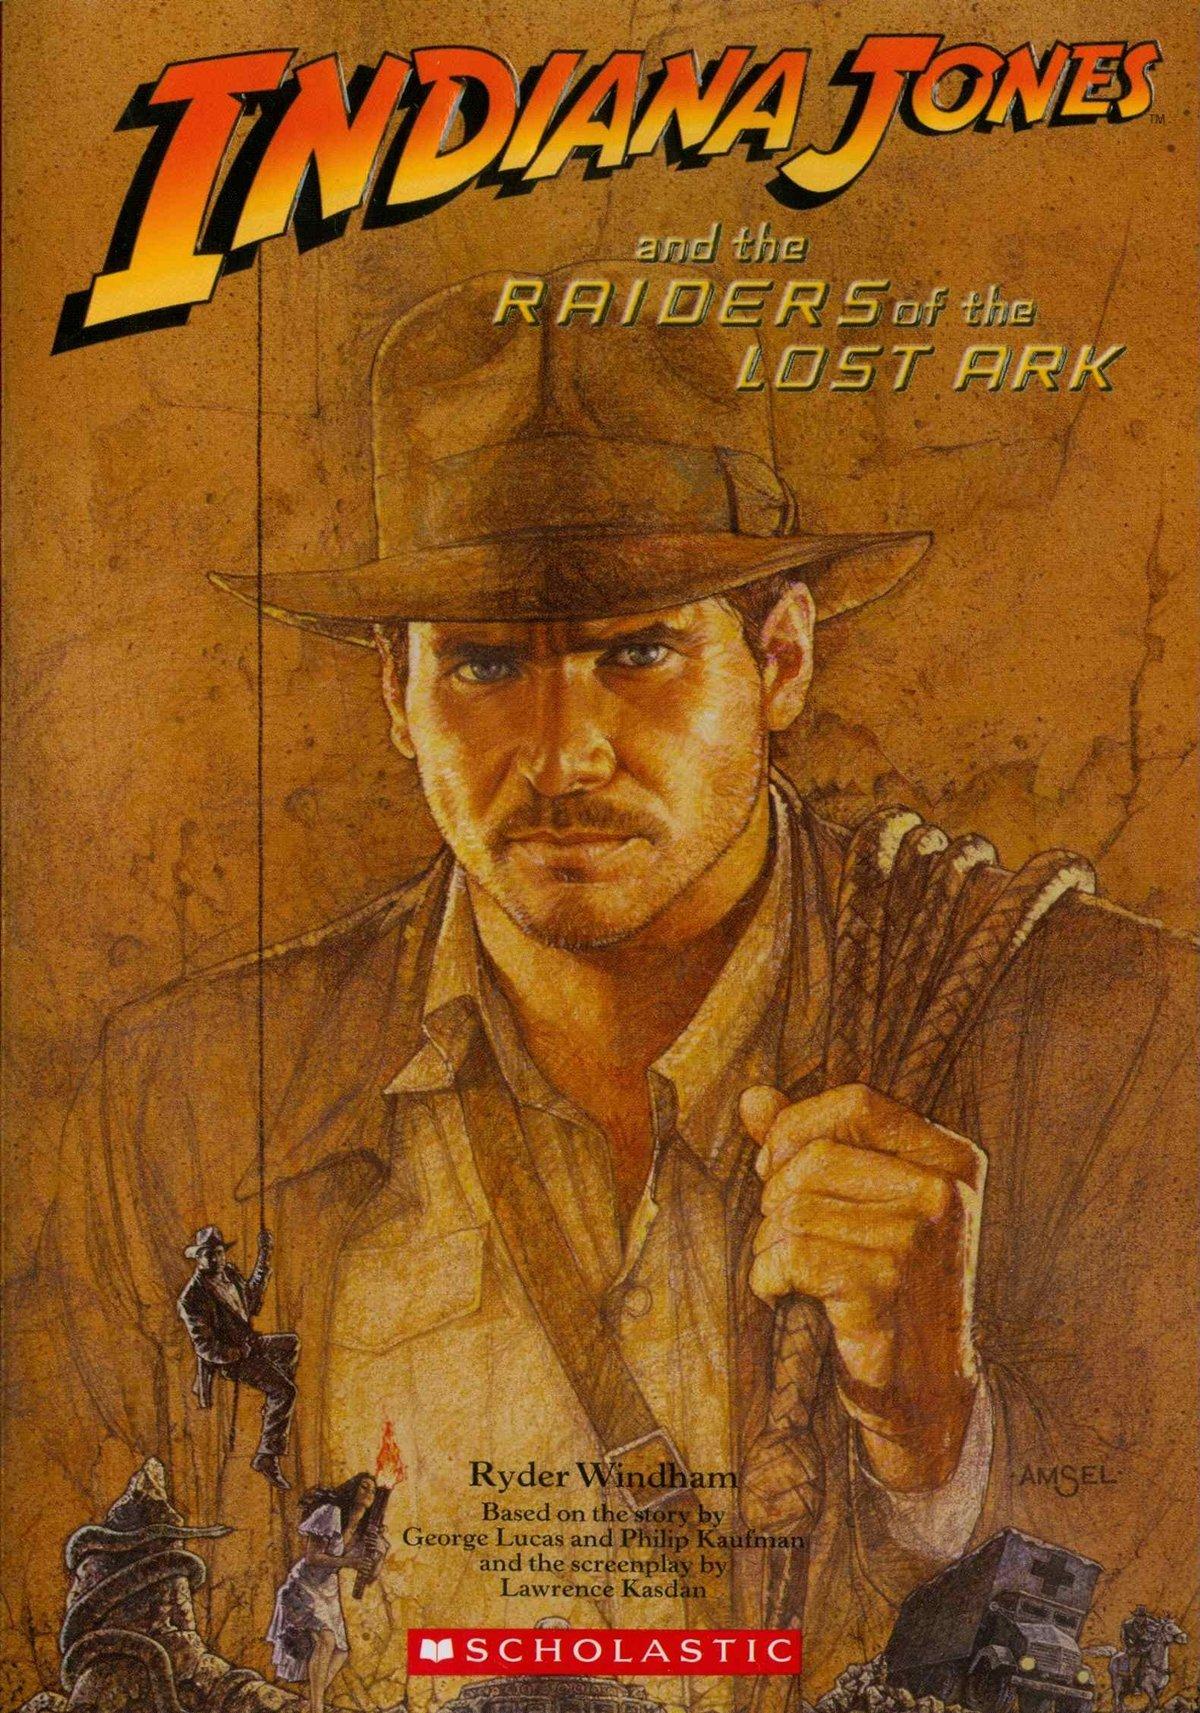 Indiana Jones and the Raiders of the Lost Ark: Ryder Windham